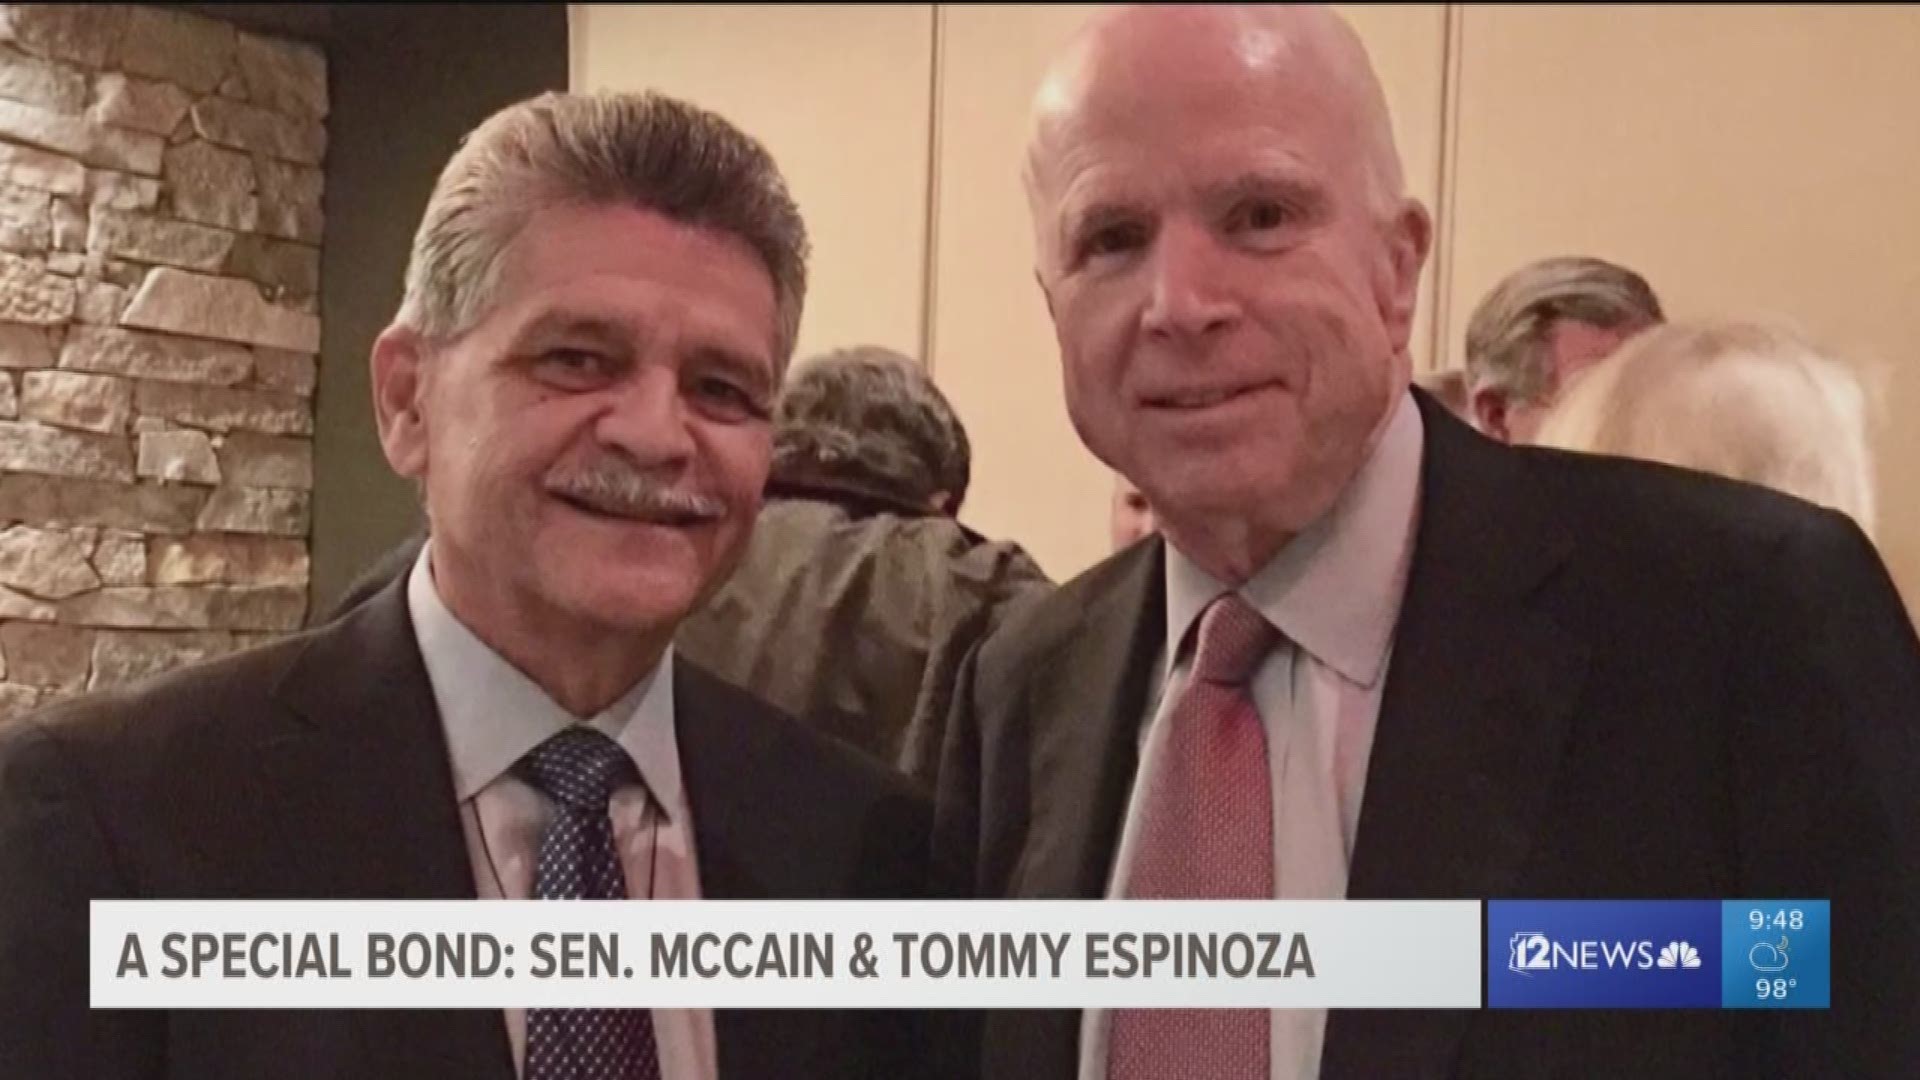 Sen. McCain and Tommy Espinoza, long-time friends and compadres.